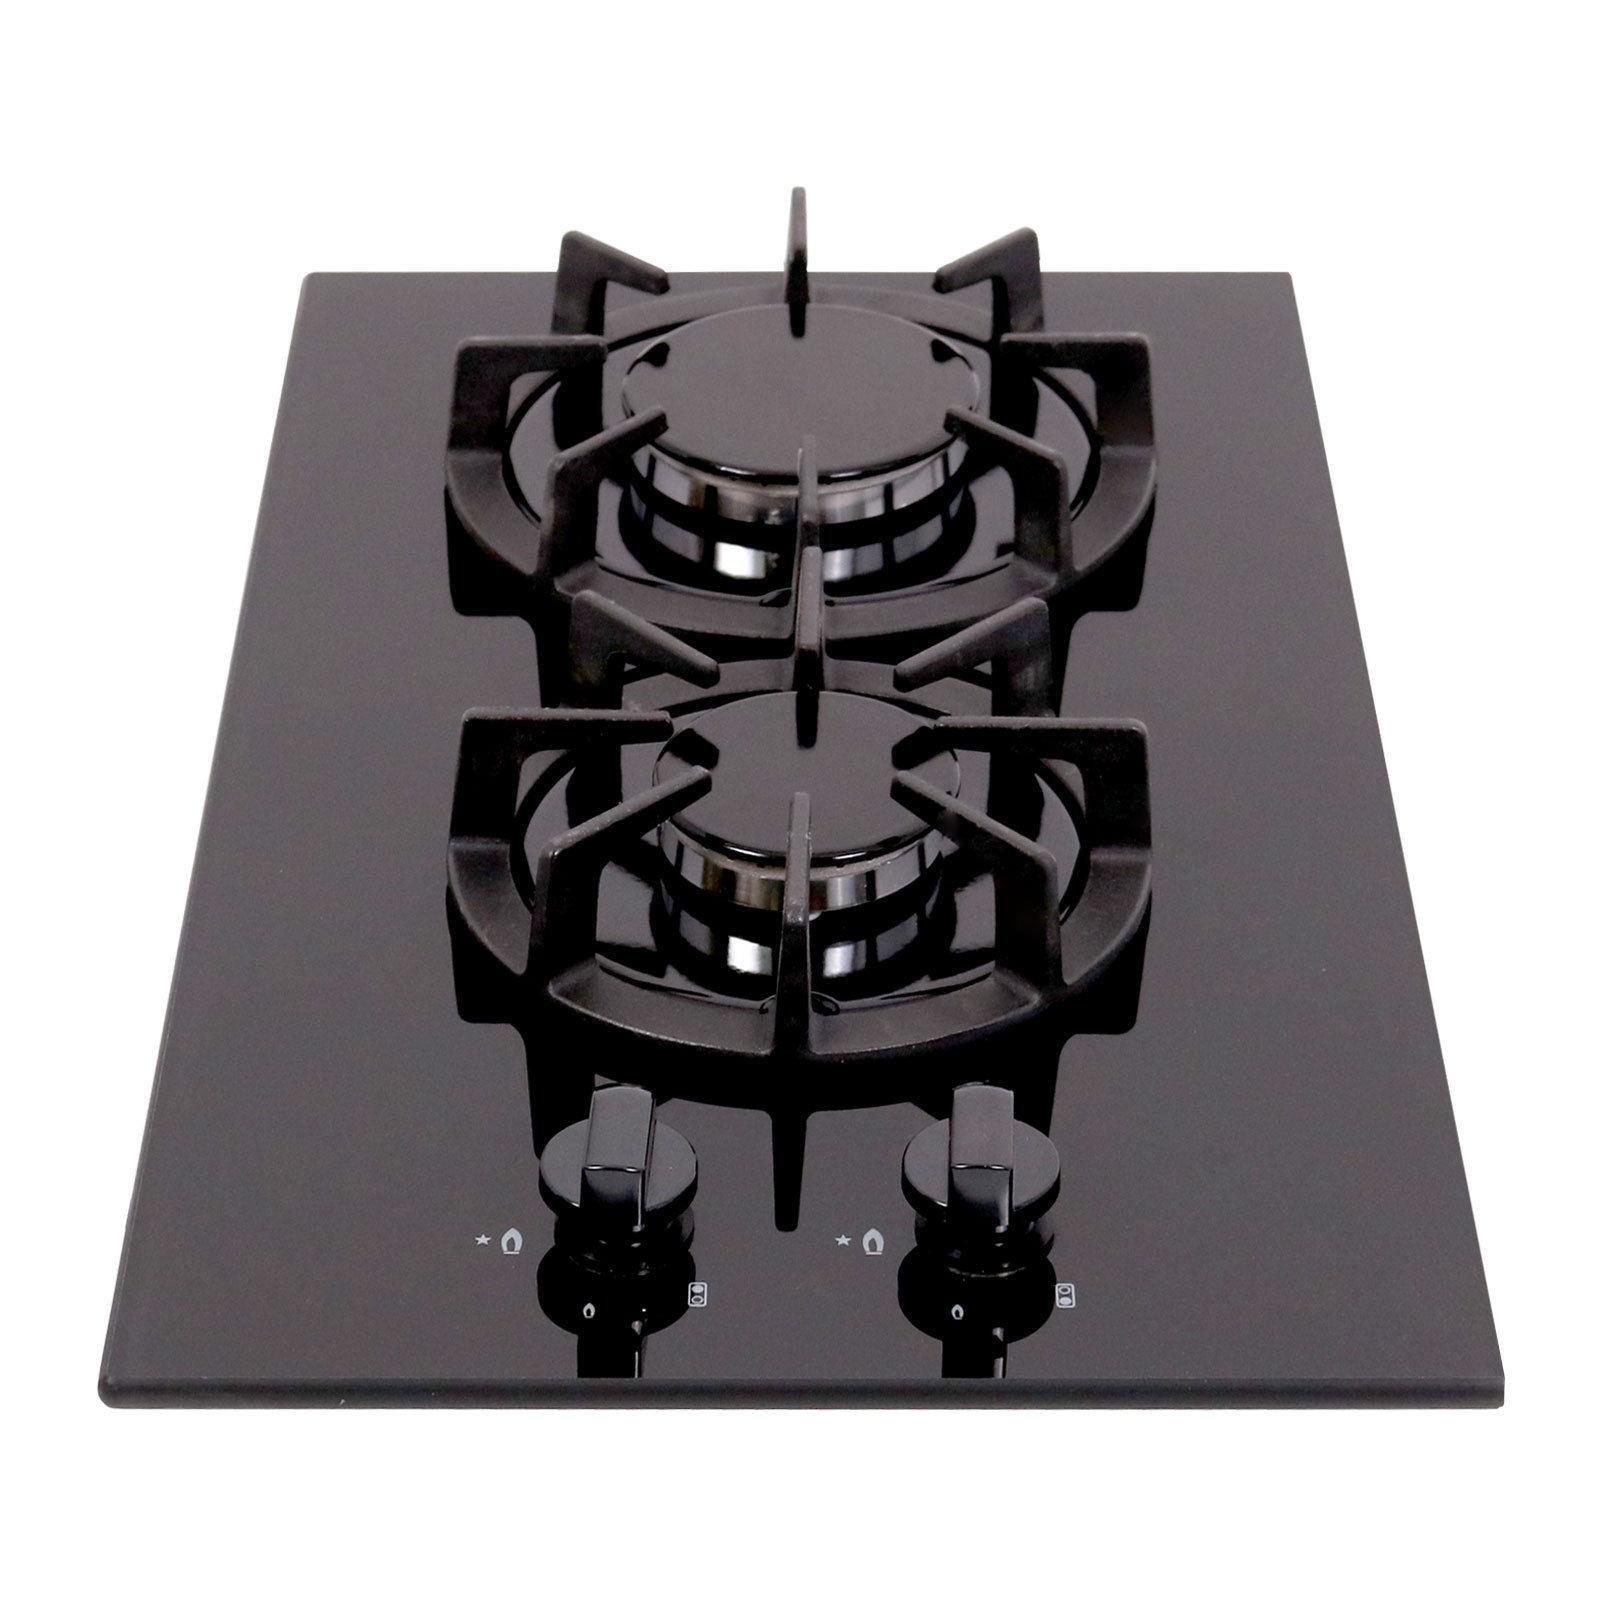 30cm Black Gas On Glass Domino Hob With Cast Iron Stands And LPG Kit- BGH30BL